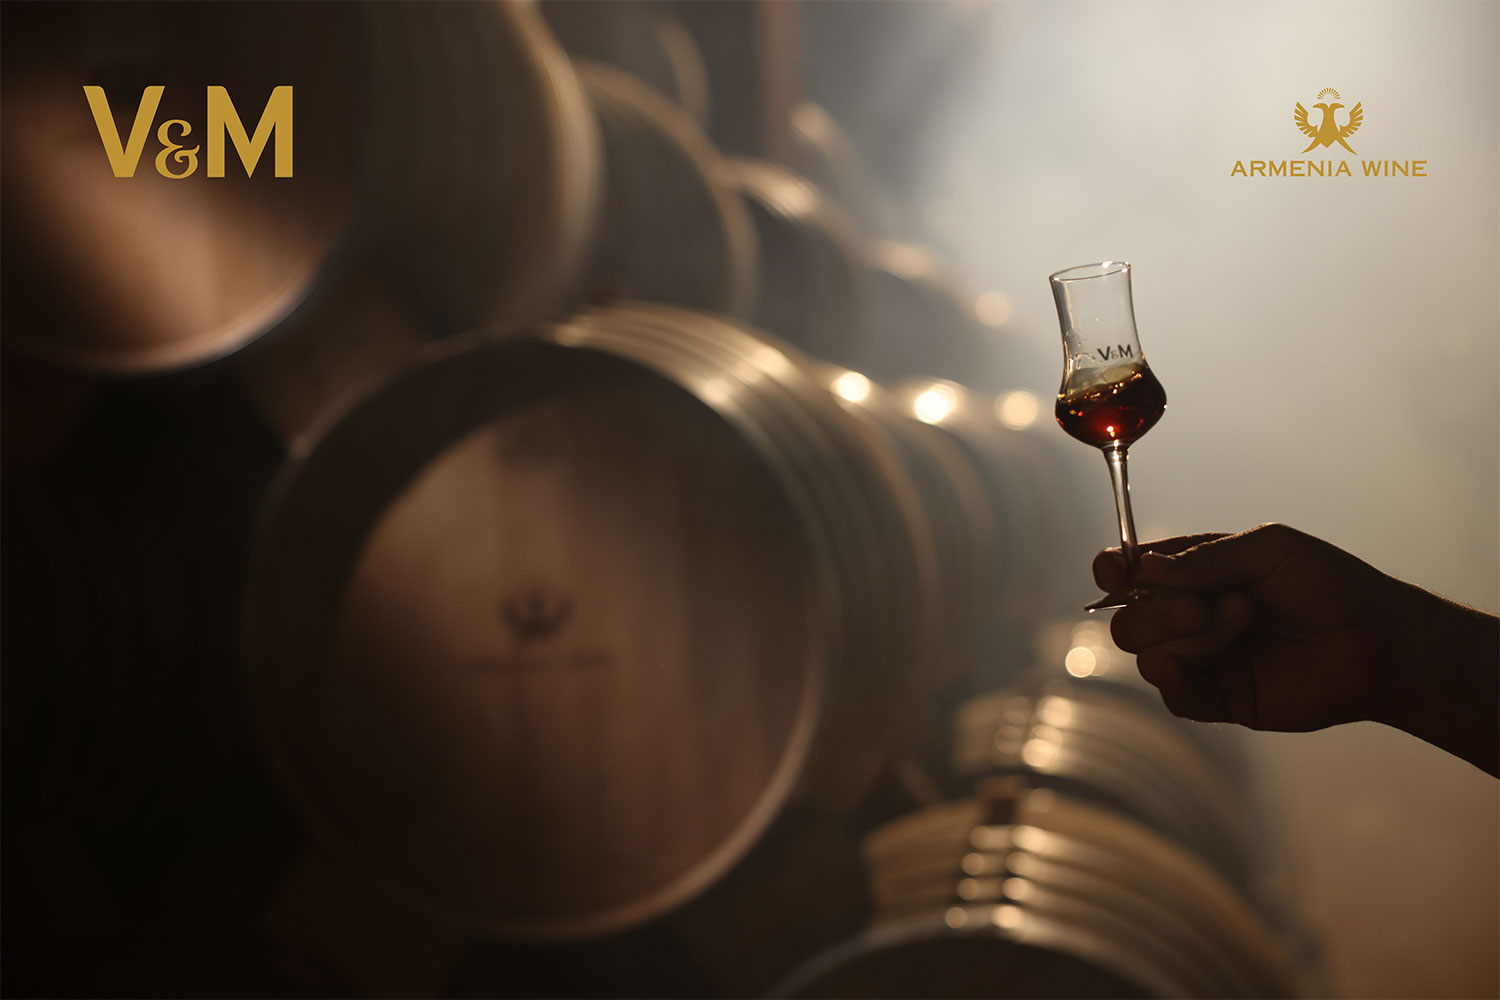 "Armenia Wine" will present the unique "V&M" brandy for the first time at the Opera House